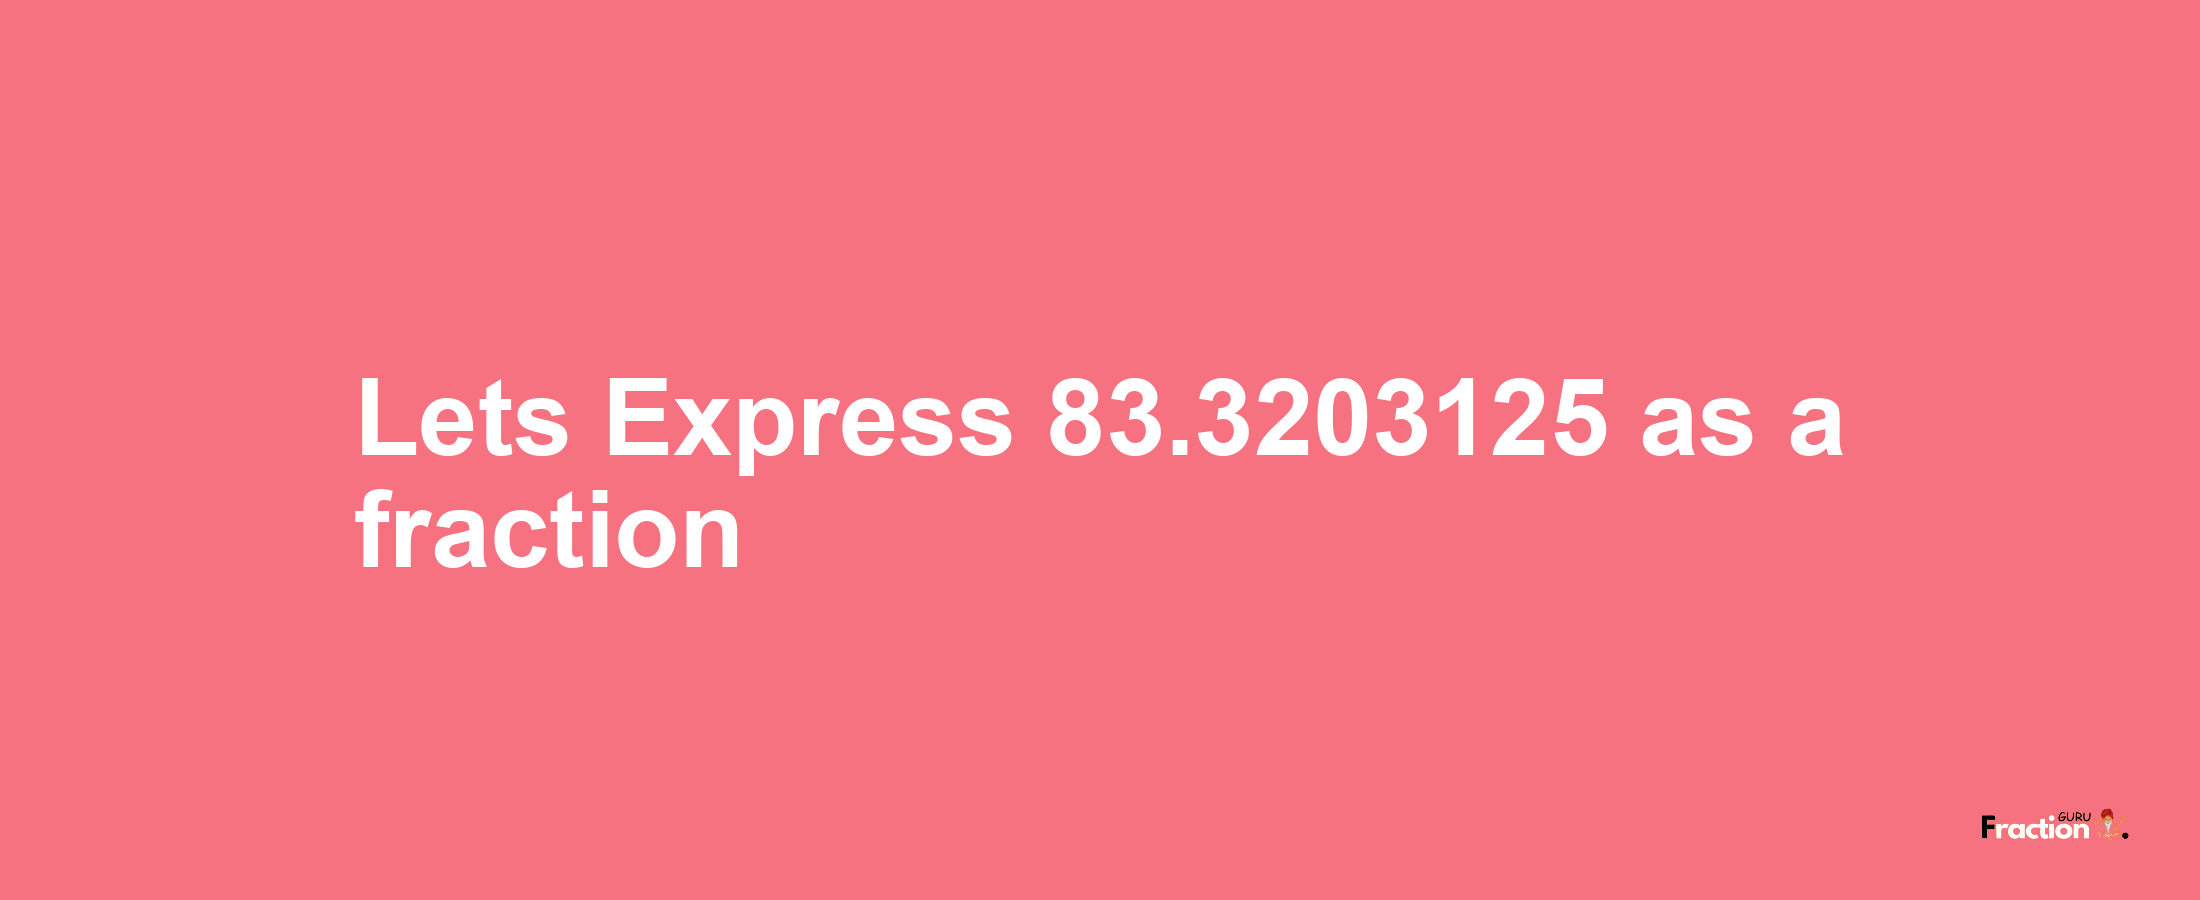 Lets Express 83.3203125 as afraction